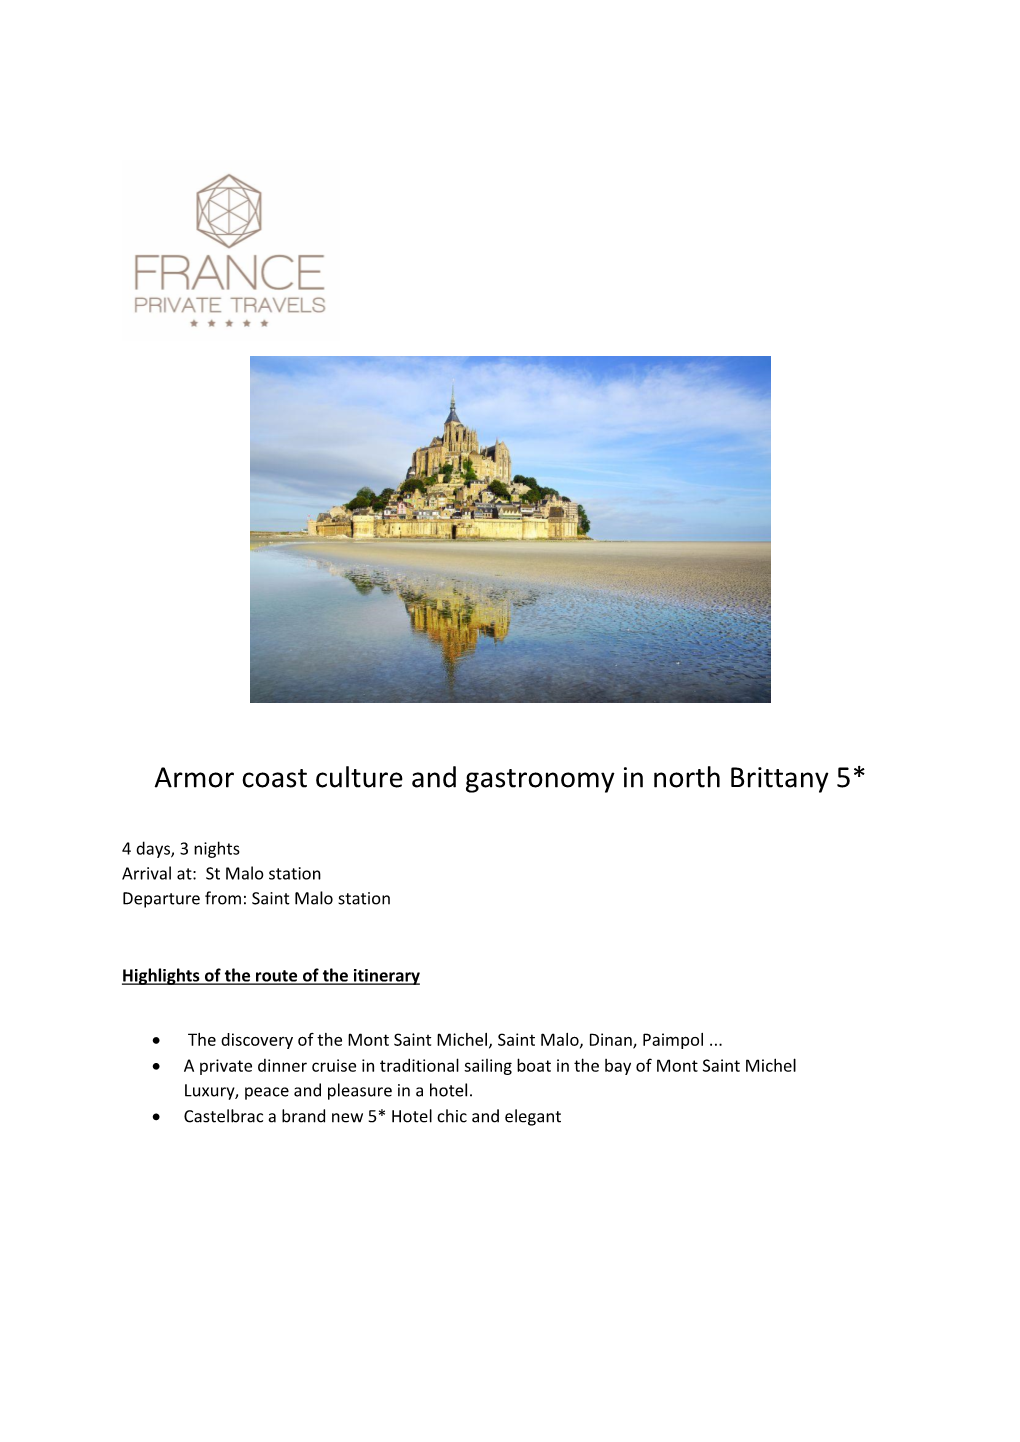 Armor Coast Culture and Gastronomy in North Brittany 5*